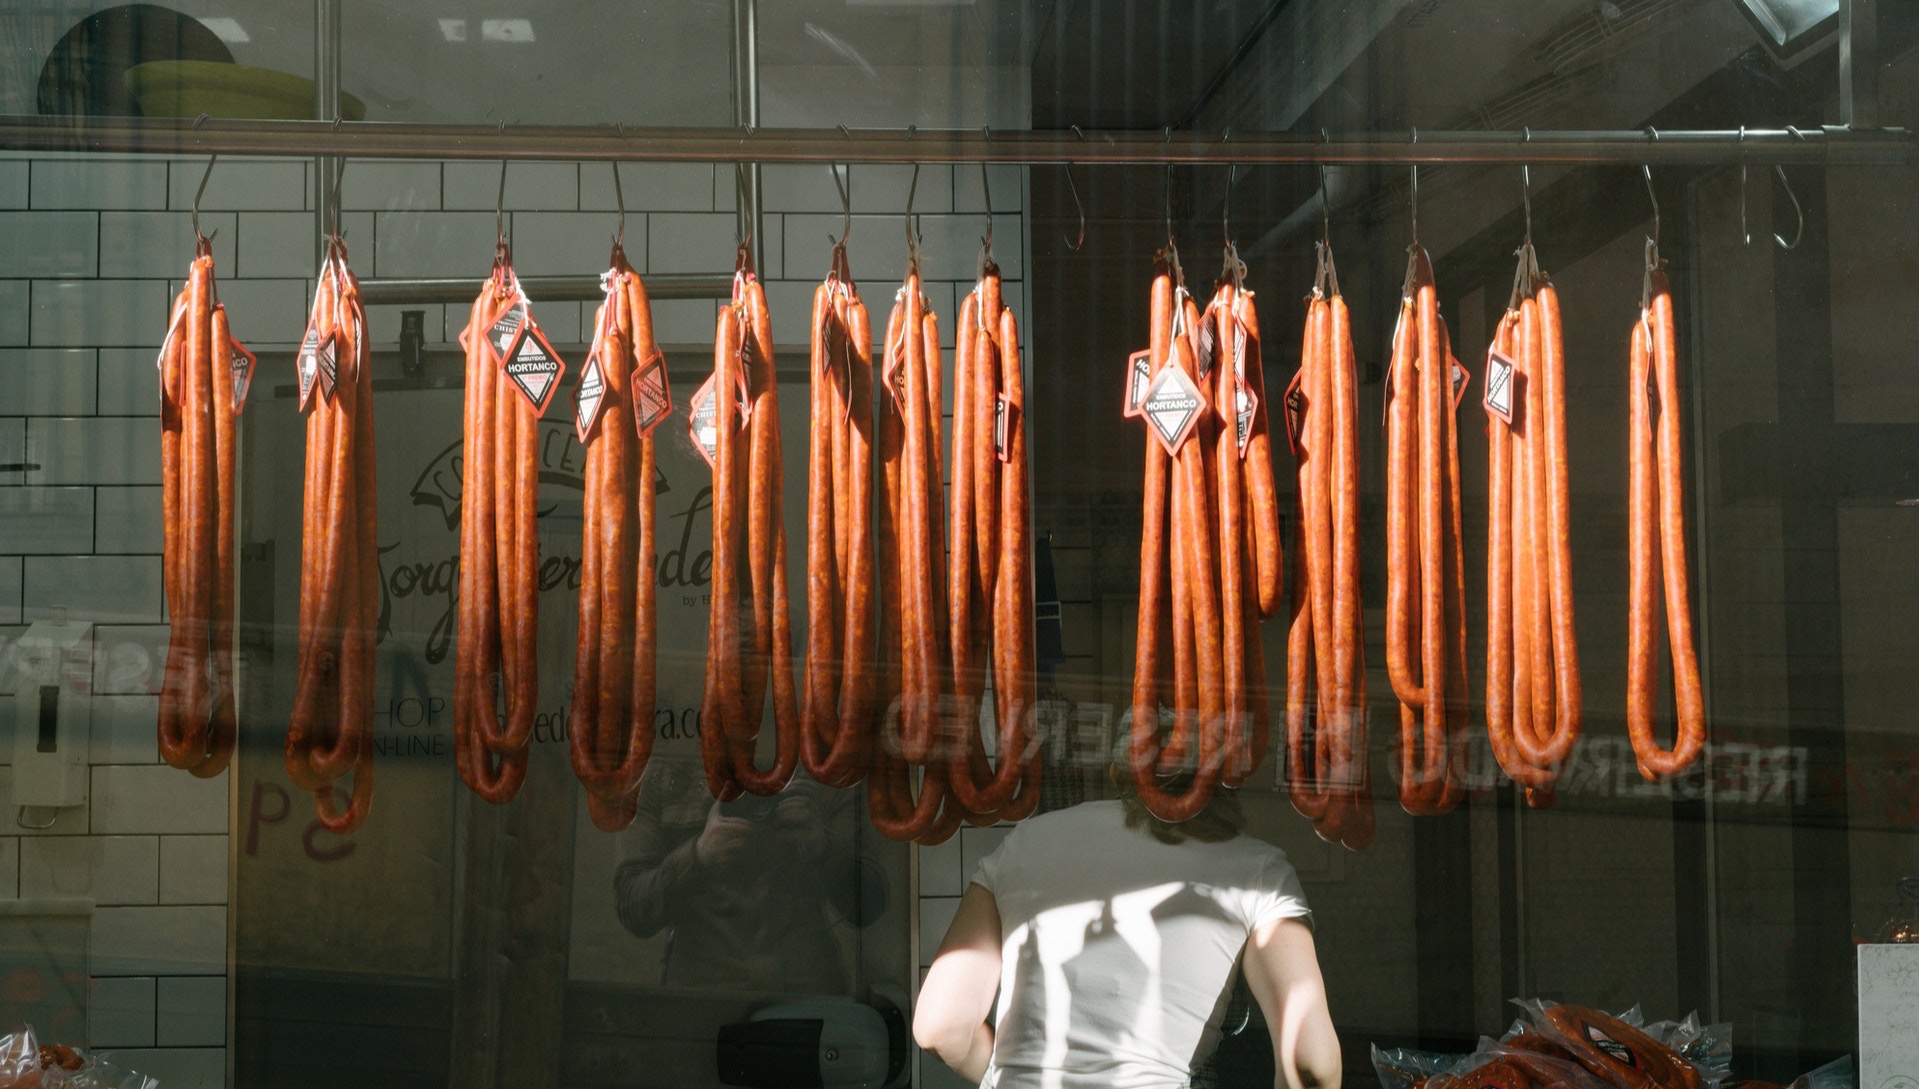 Polish meat industry ready for food crisis